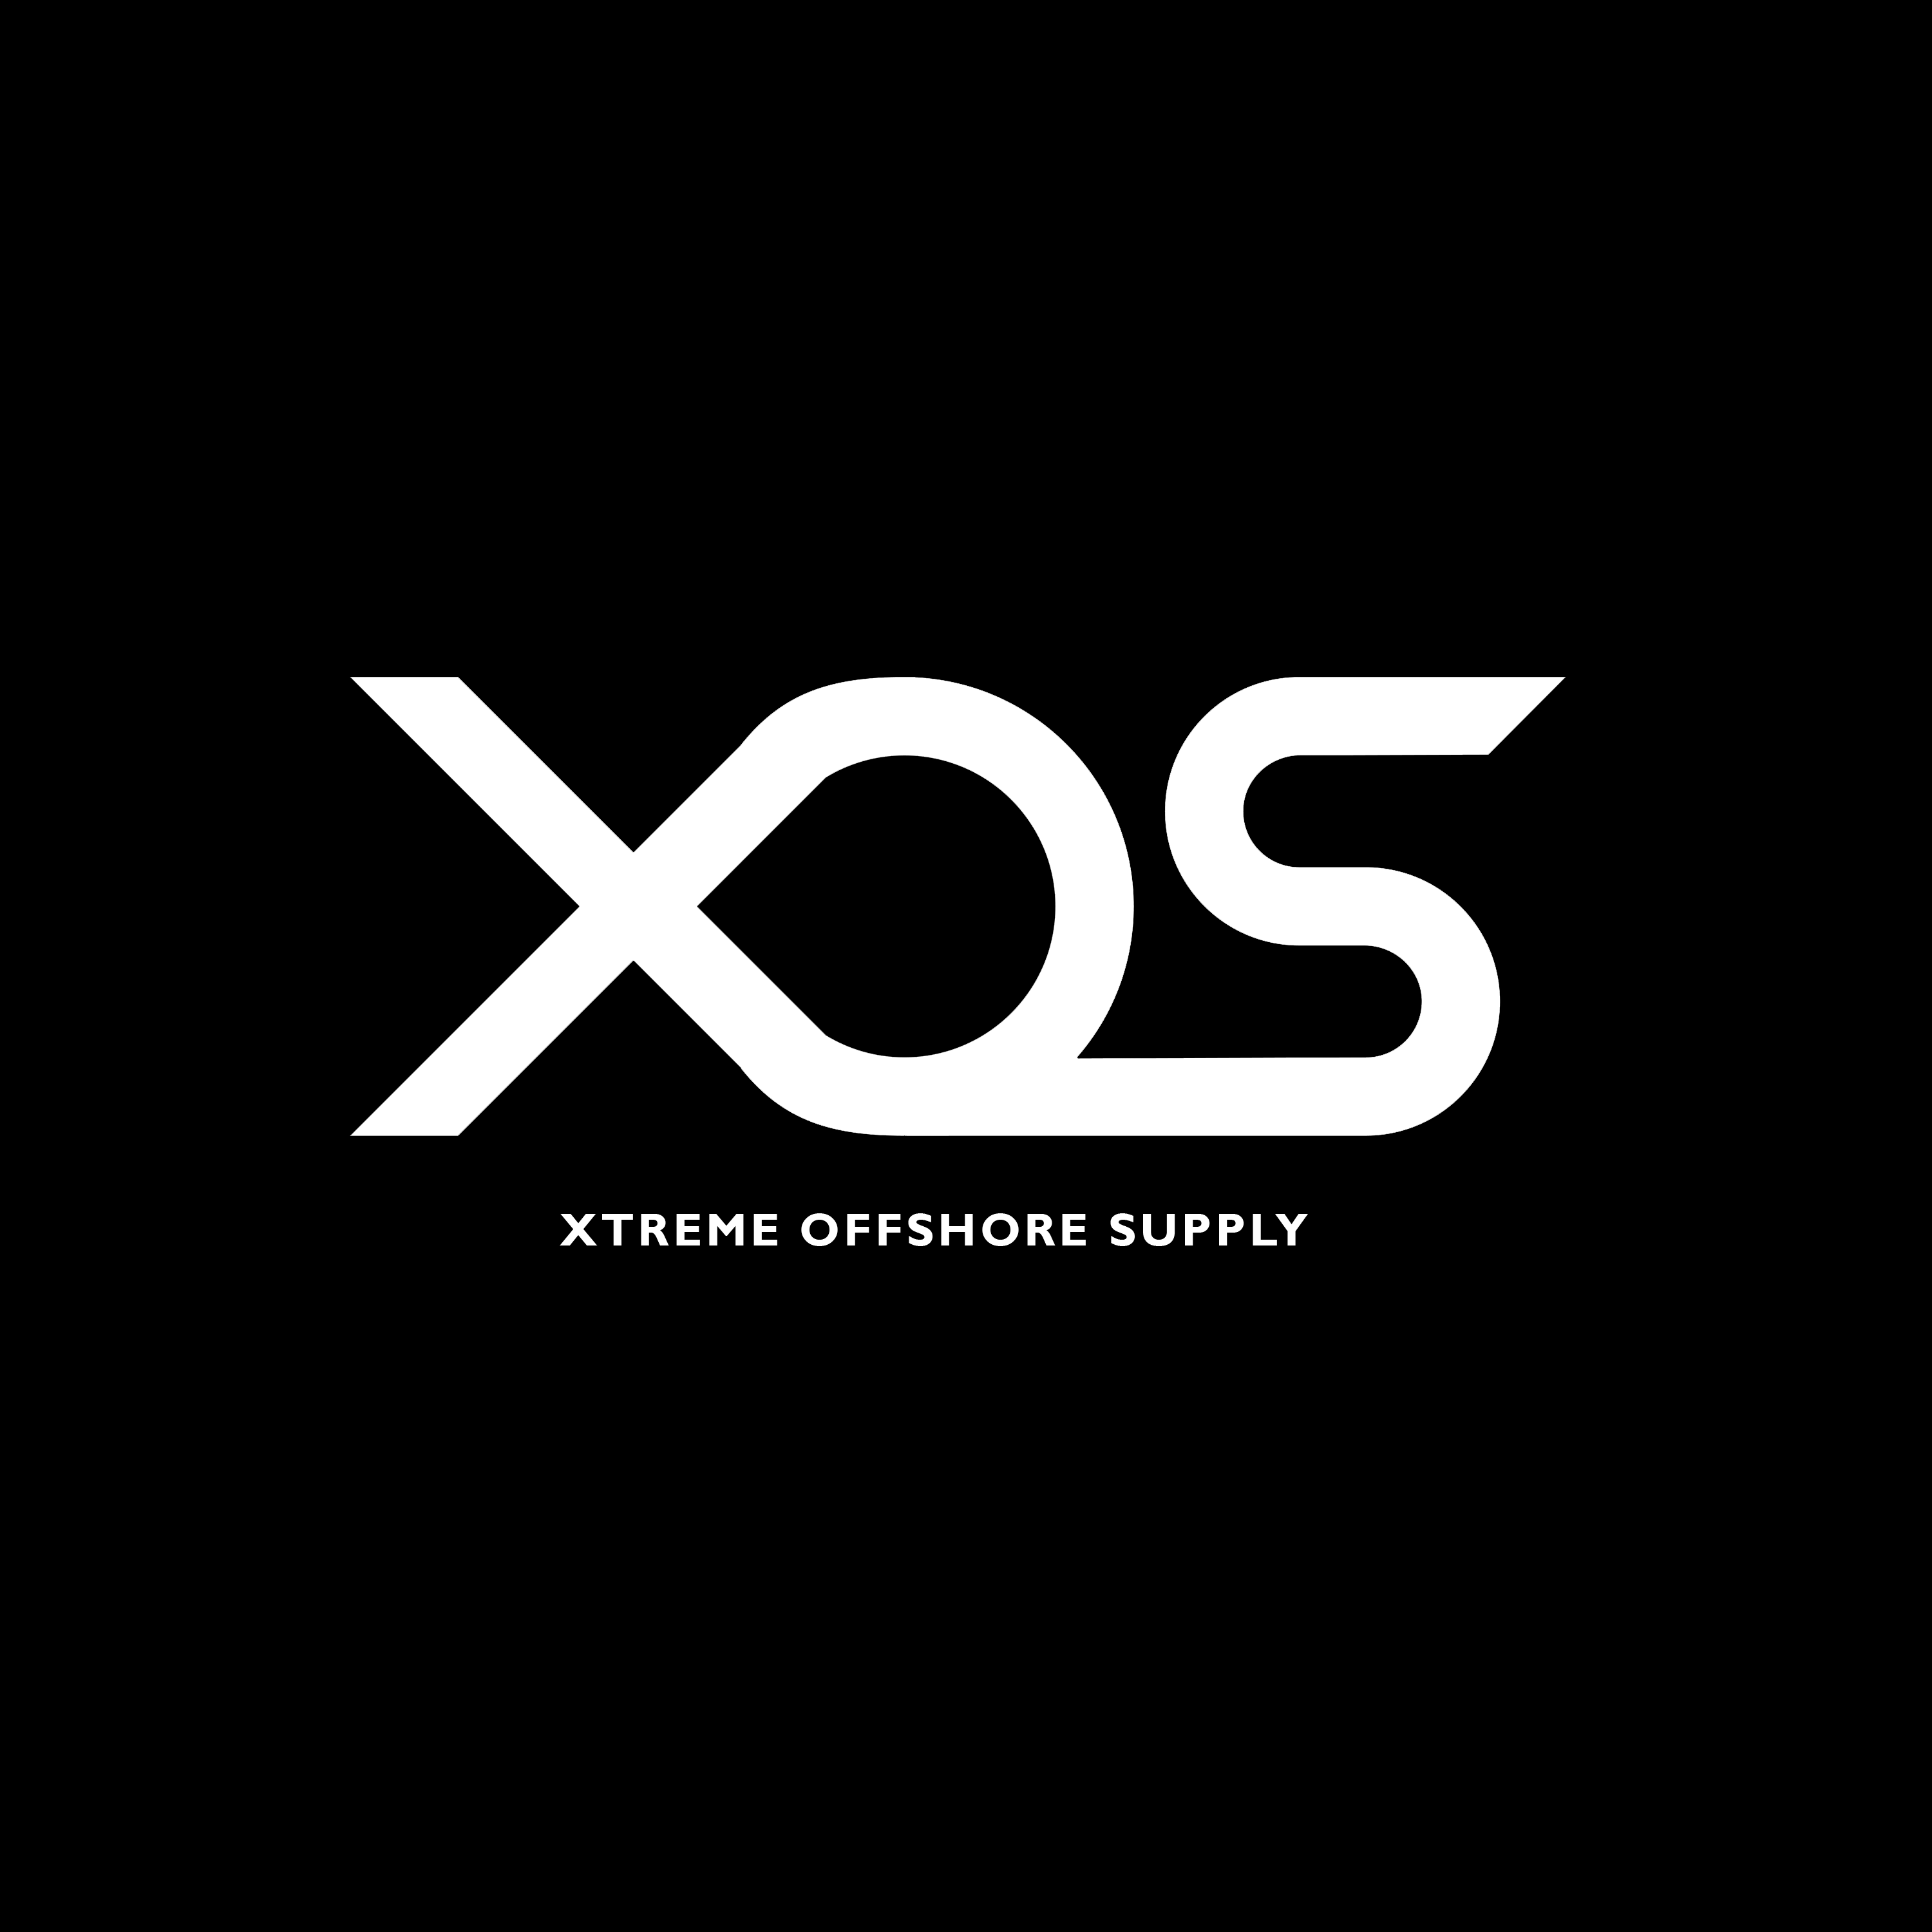 Xtreme Offshore Supply